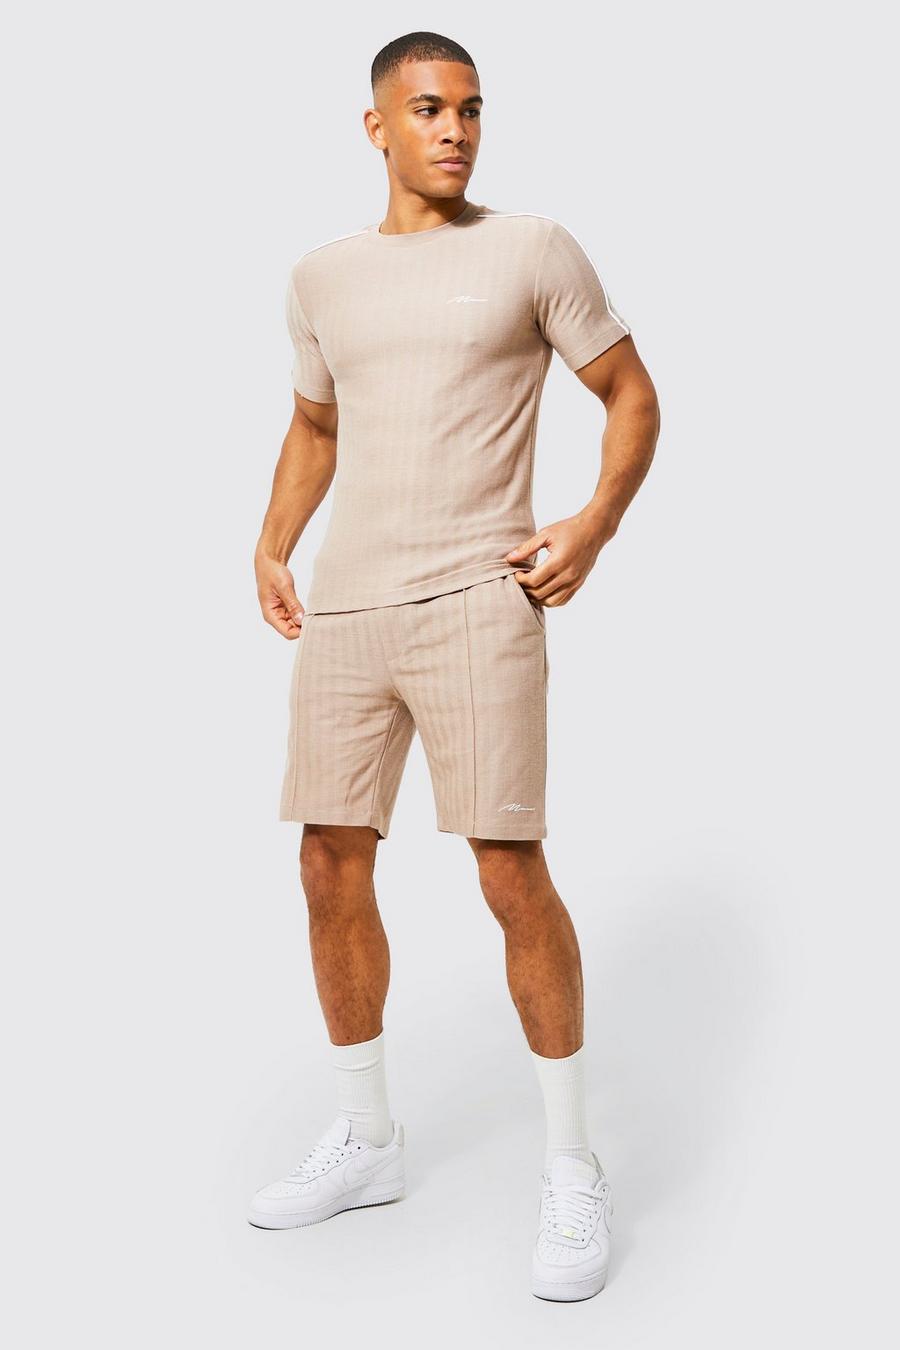 Stone beige Jacquard Muscle Fit Short Set With Piping